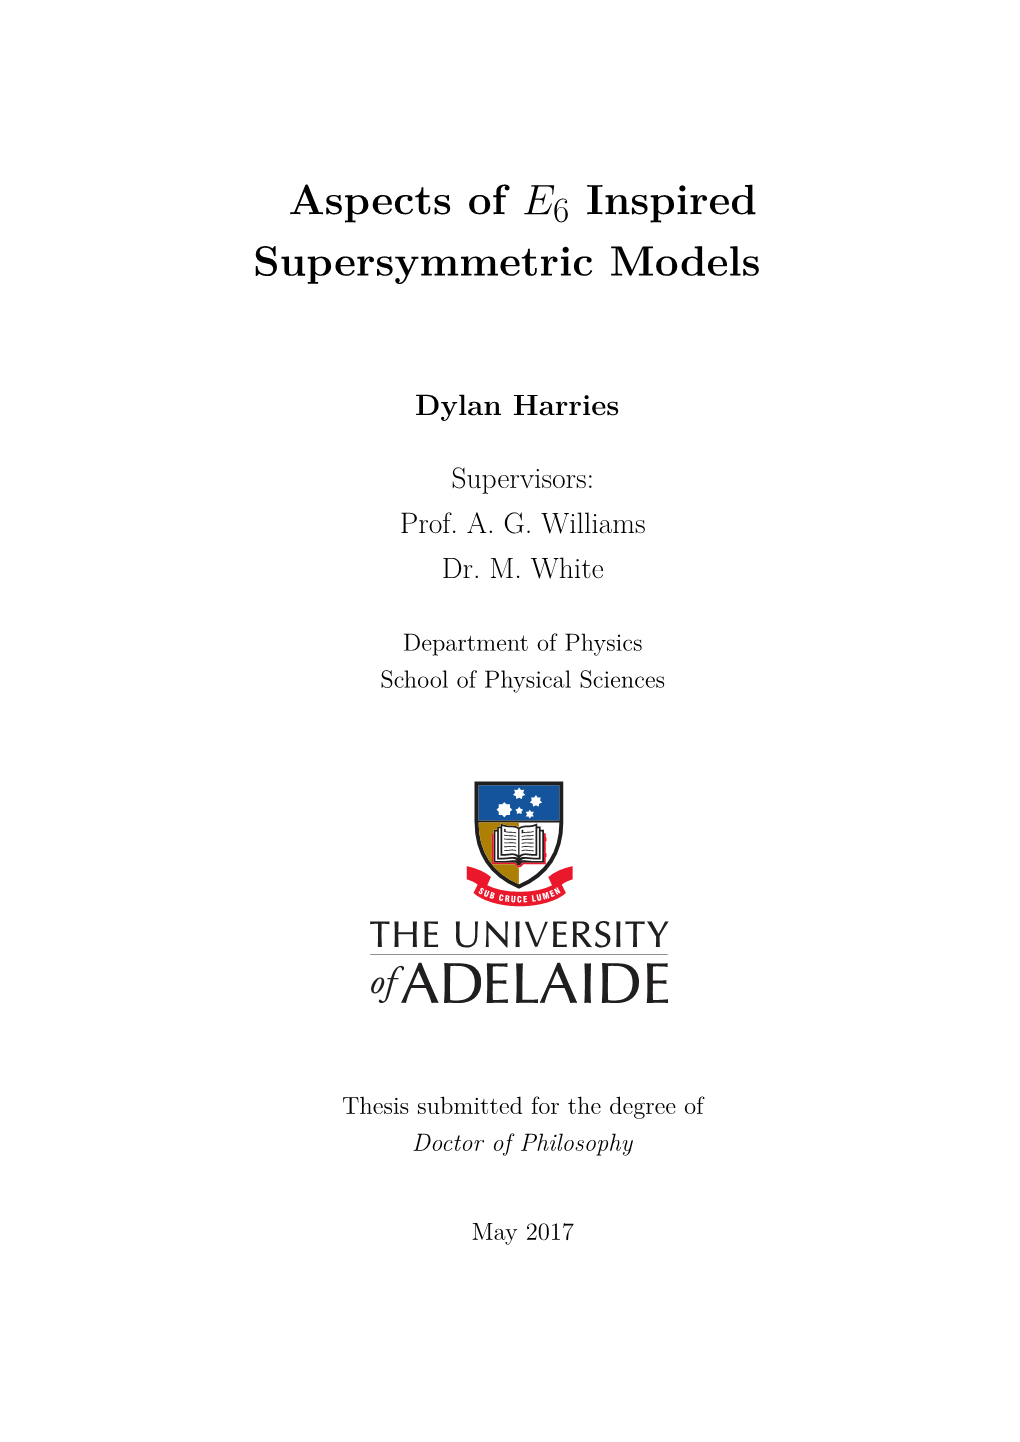 Aspects of E₆ Inspired Supersymmetric Models